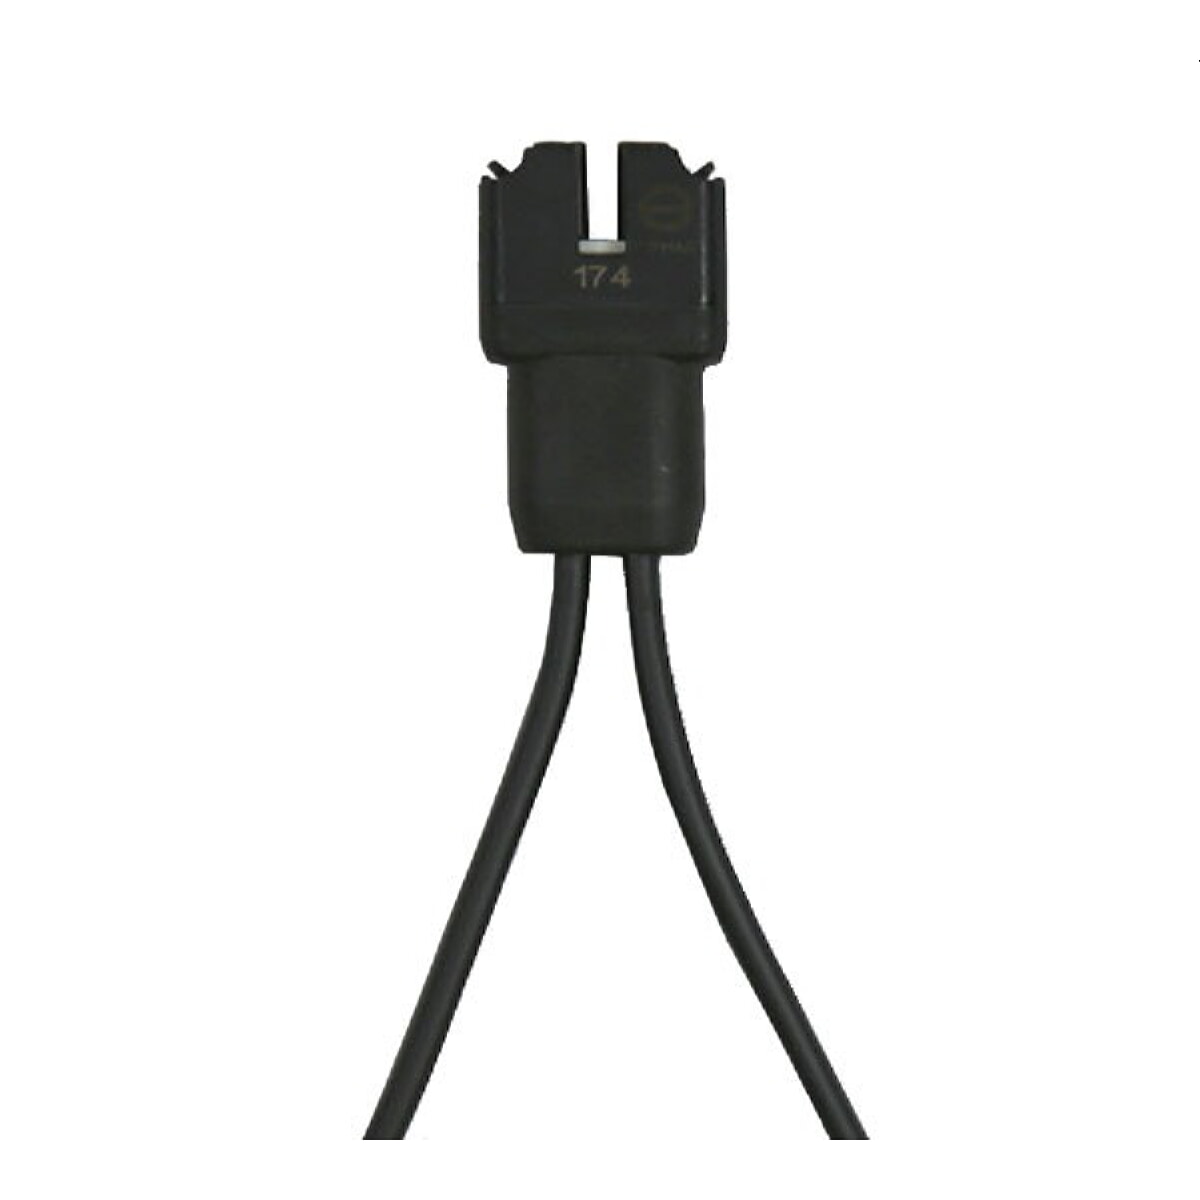 Enphase Q-25-20, AC cable for micro inverter 1-phase